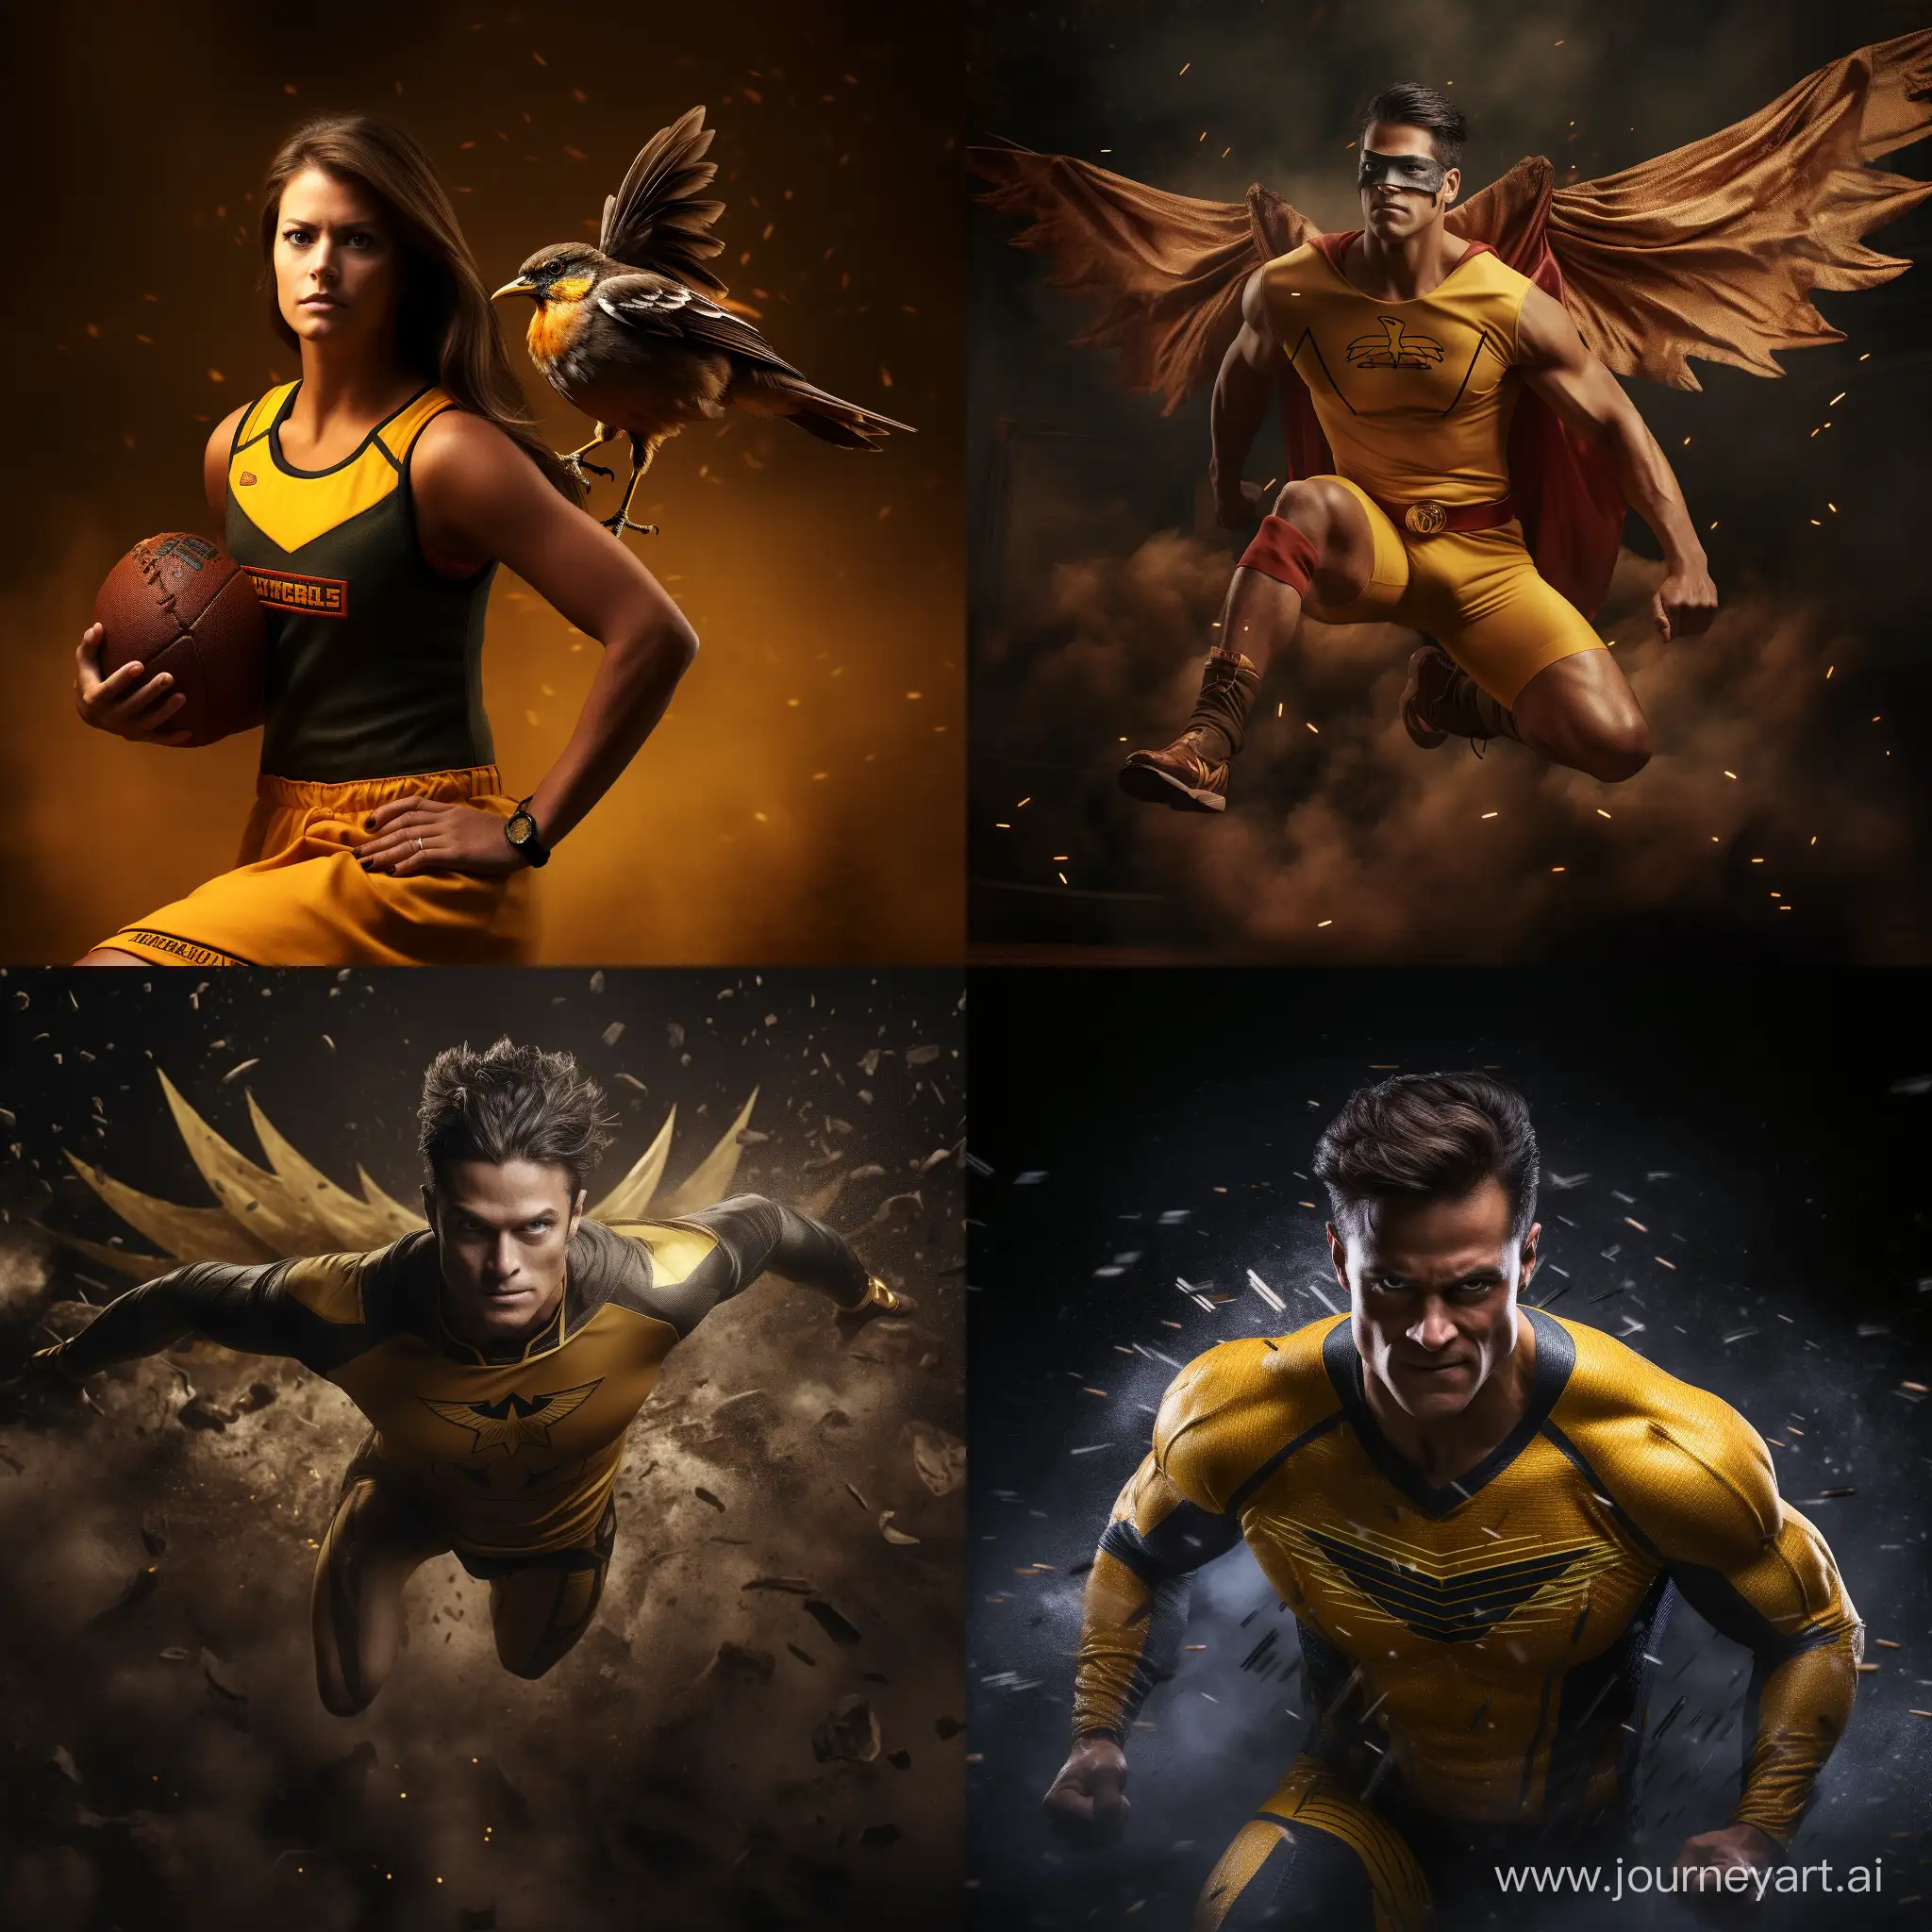 Dynamic-Golden-Robin-Athlete-Captured-in-Heroic-11-Photography